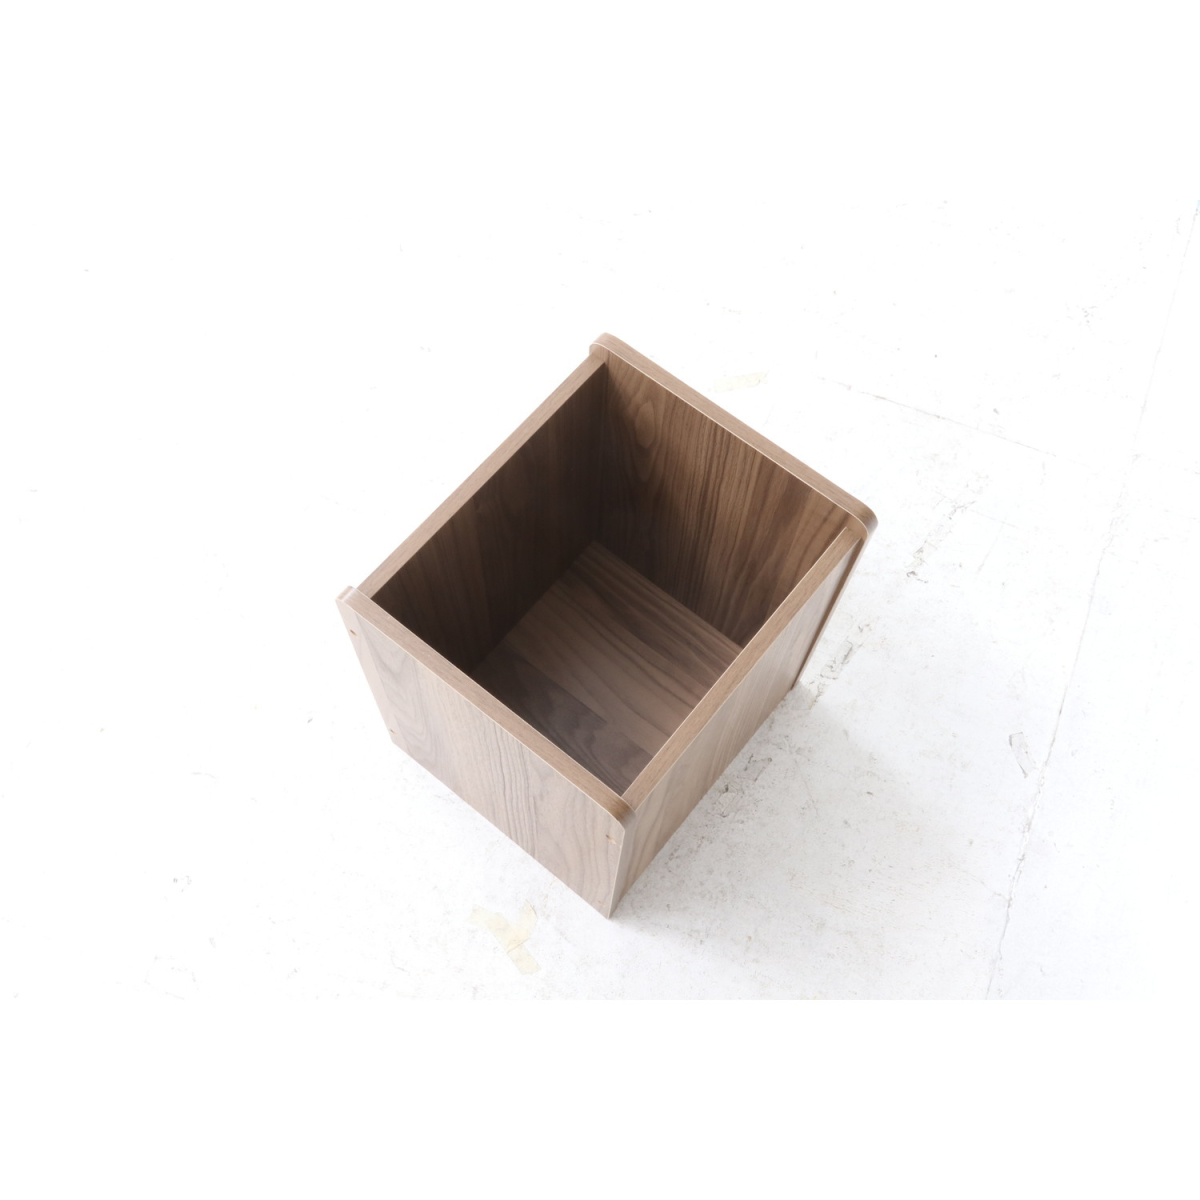  dresser three surface mirror chair attaching outlet attaching Brown [ new goods ][ free shipping ]( Hokkaido Okinawa remote island postage separately )